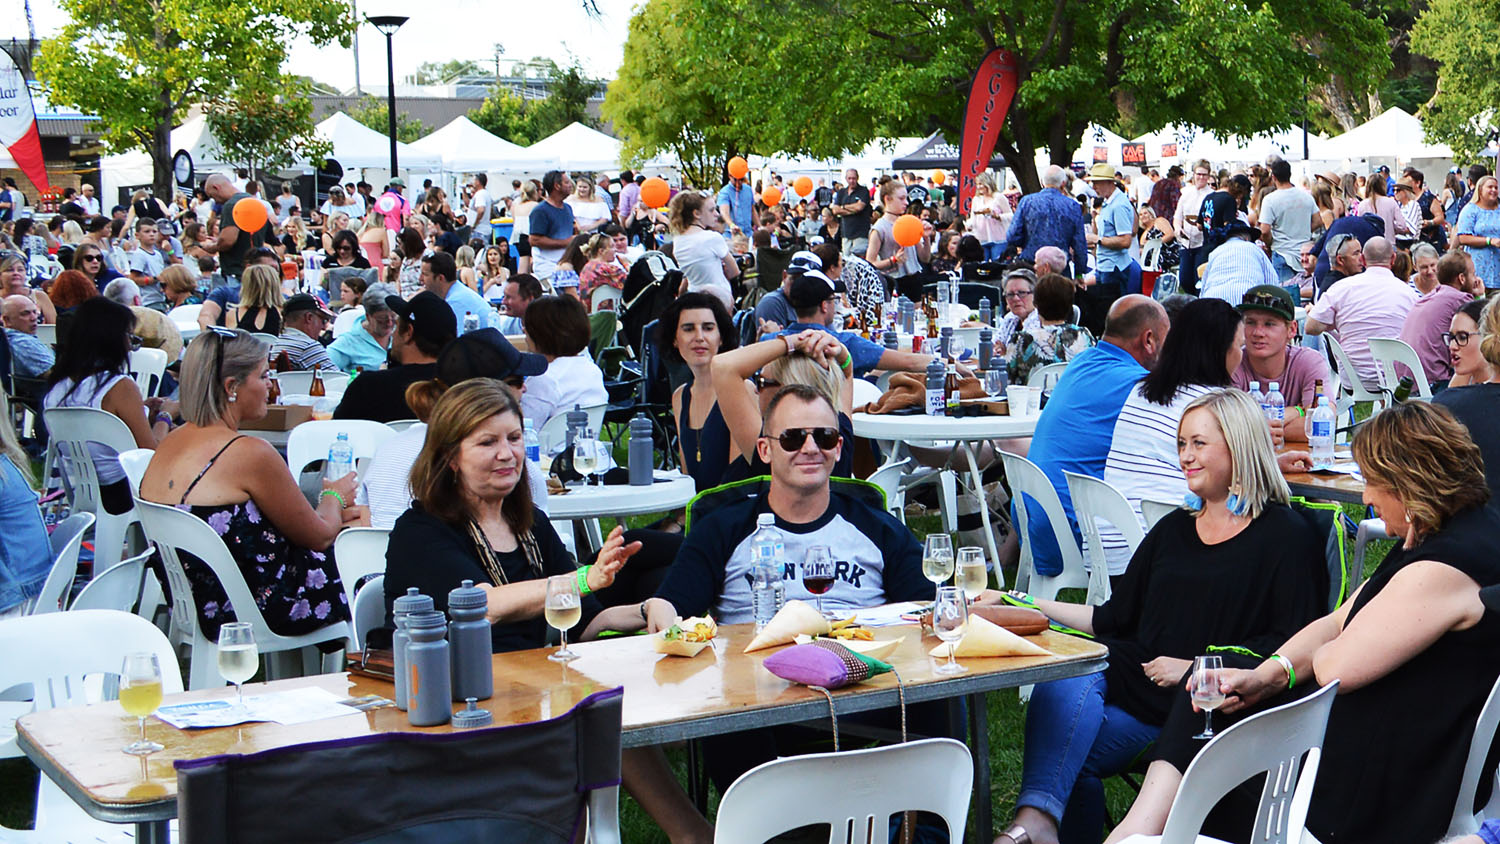 Eat, drink, and be merry for a good cause at the Wagga Wagga Food and Wine Festival